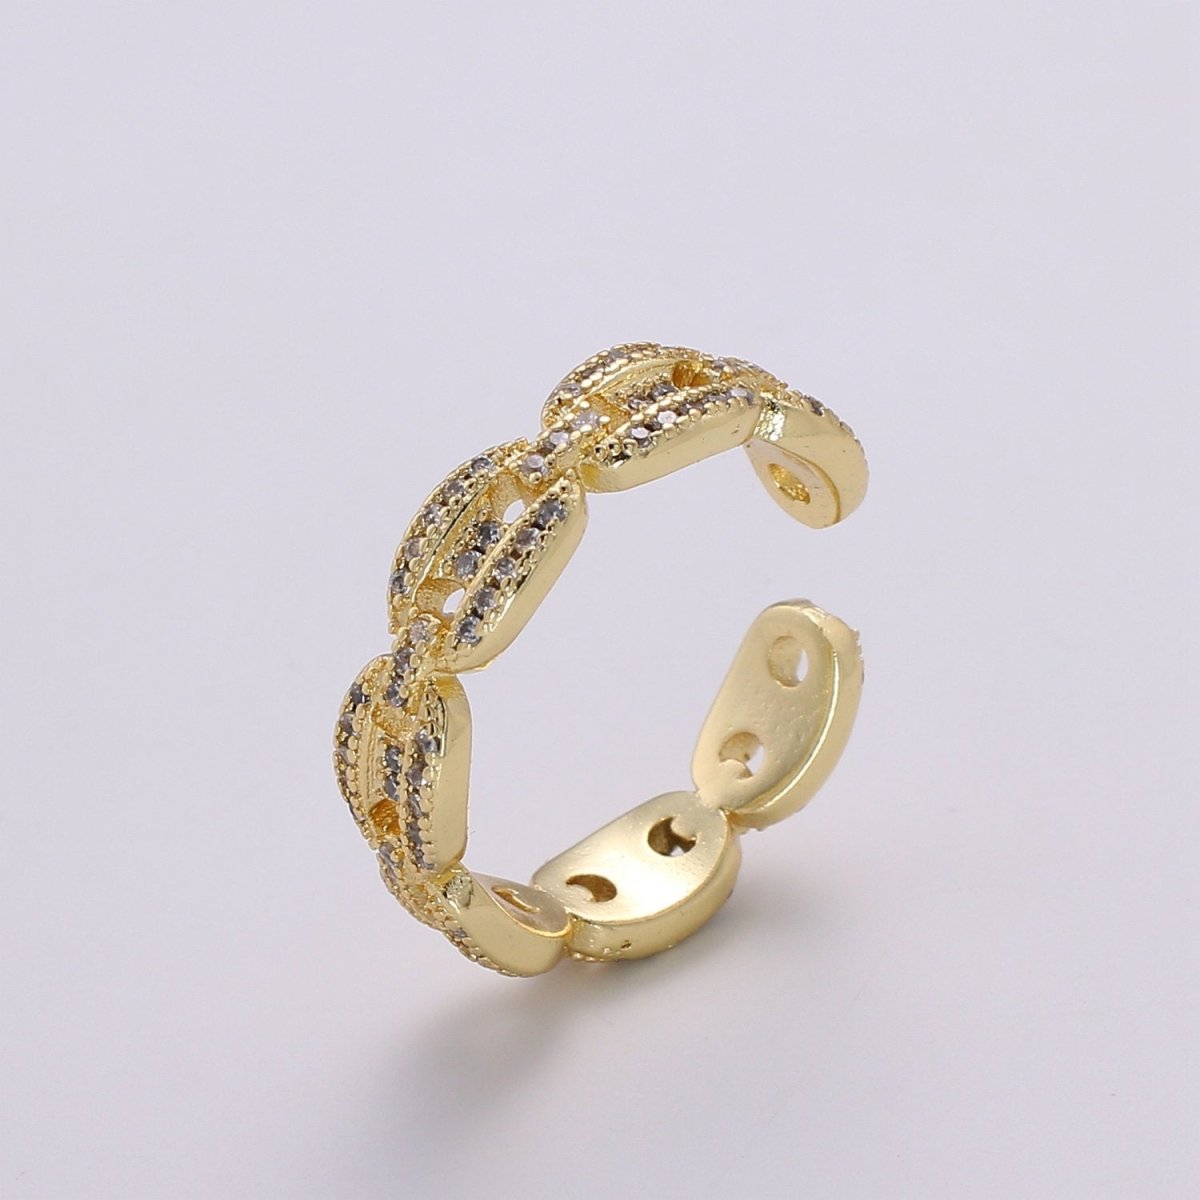 Small Mariner Link Ring, Small Link Ring, Gold Link Ring, CZ Link Ring, Statement Link Ring, Stacking Ring Gold Vermeil R-143 - DLUXCA